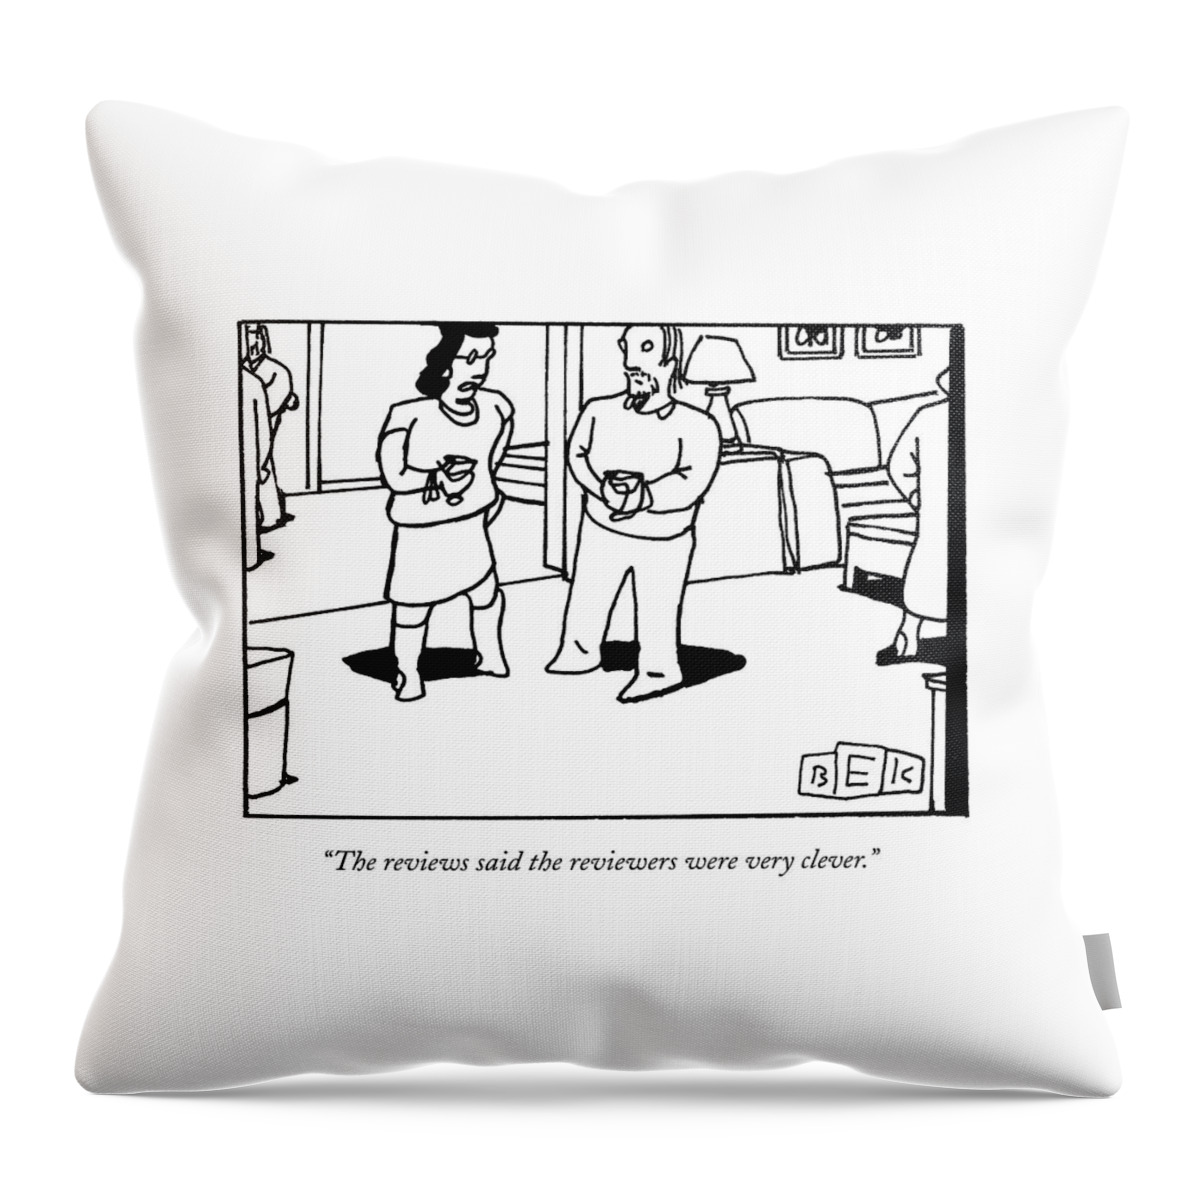 A Woman And Man Converse At A Cocktail Party Throw Pillow